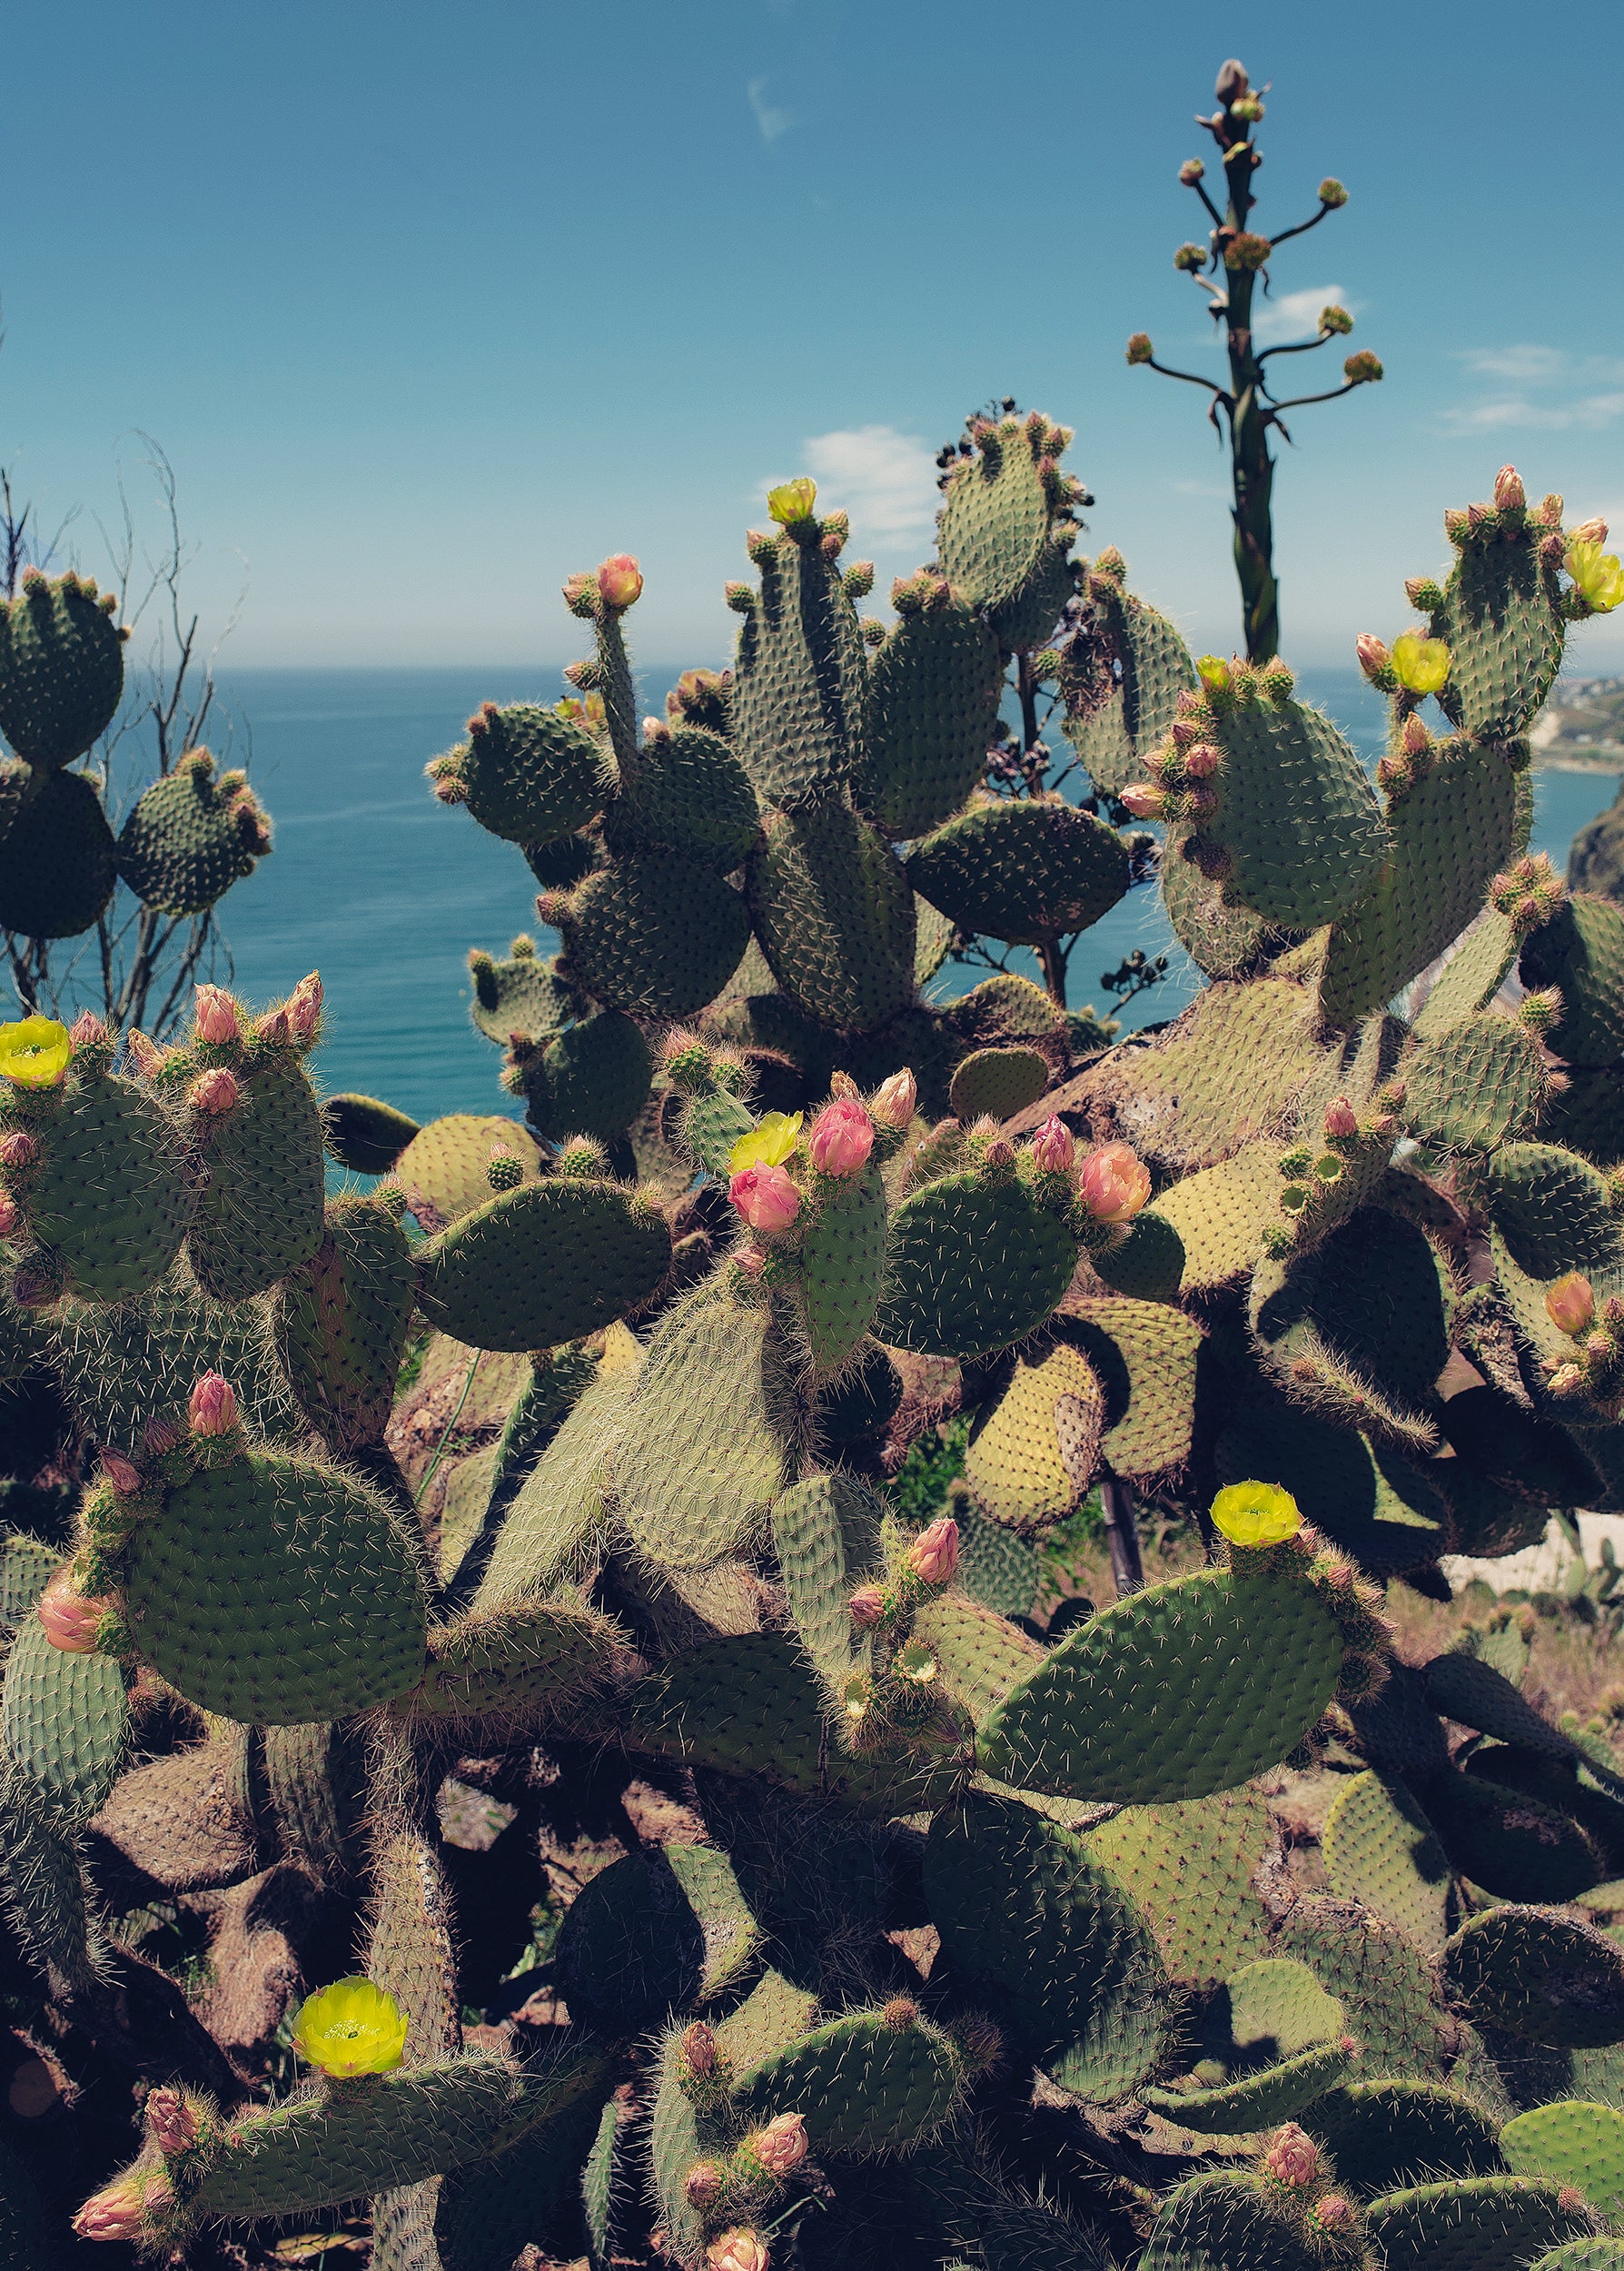 CACTUS WITH A VIEW.